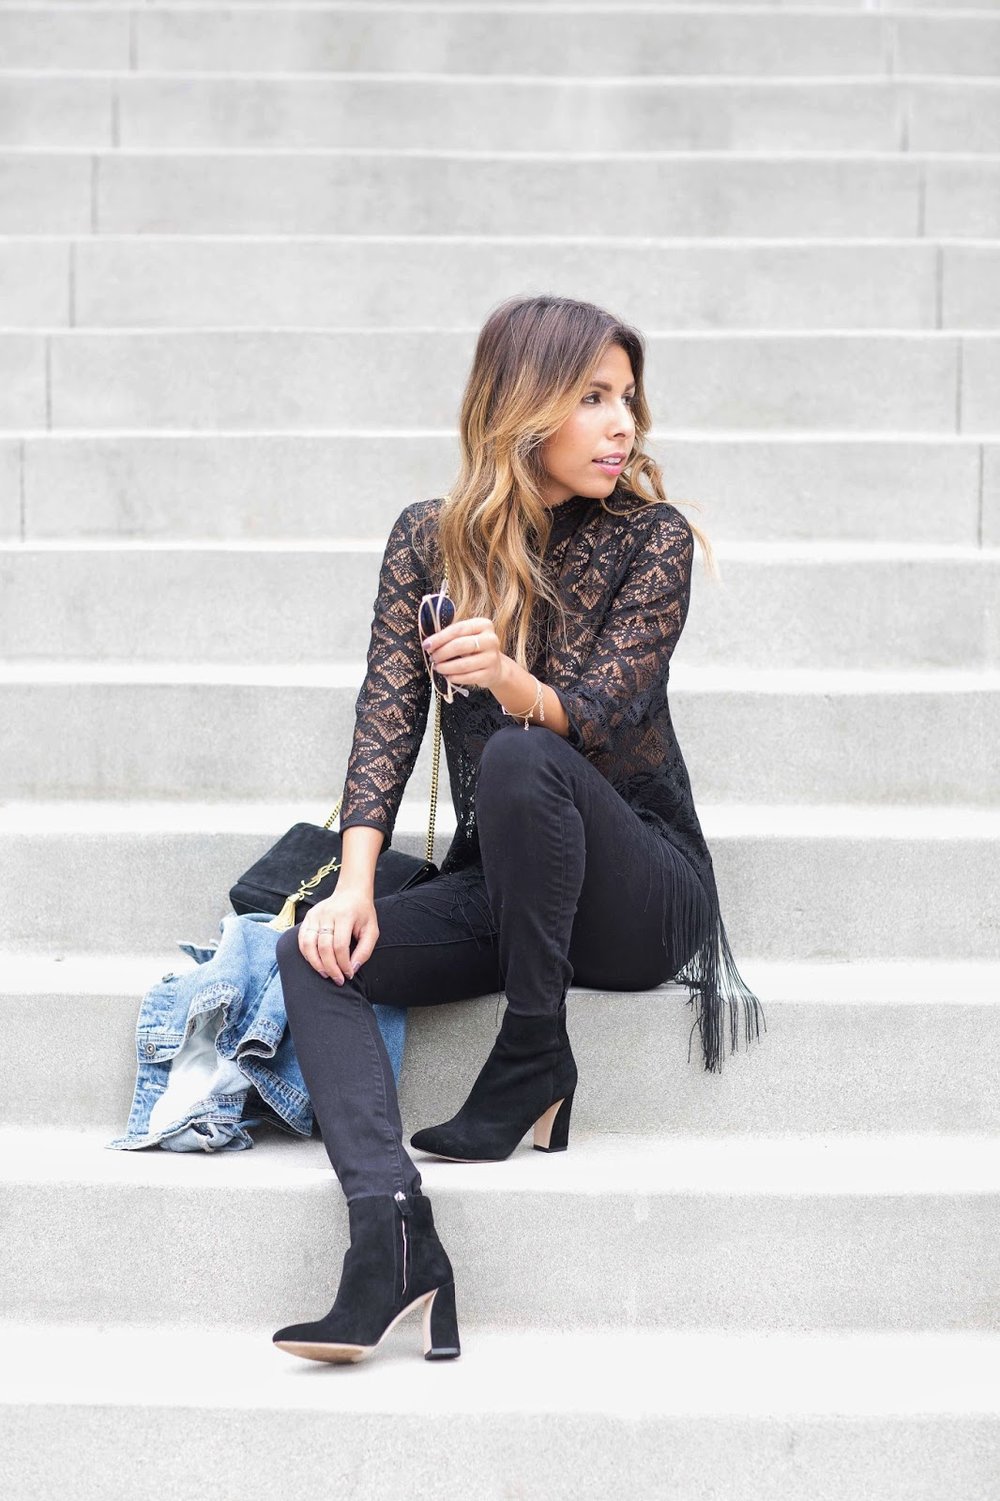 lace top zara, how to wear all black, denim jacket styles, black boot outfit for fall 